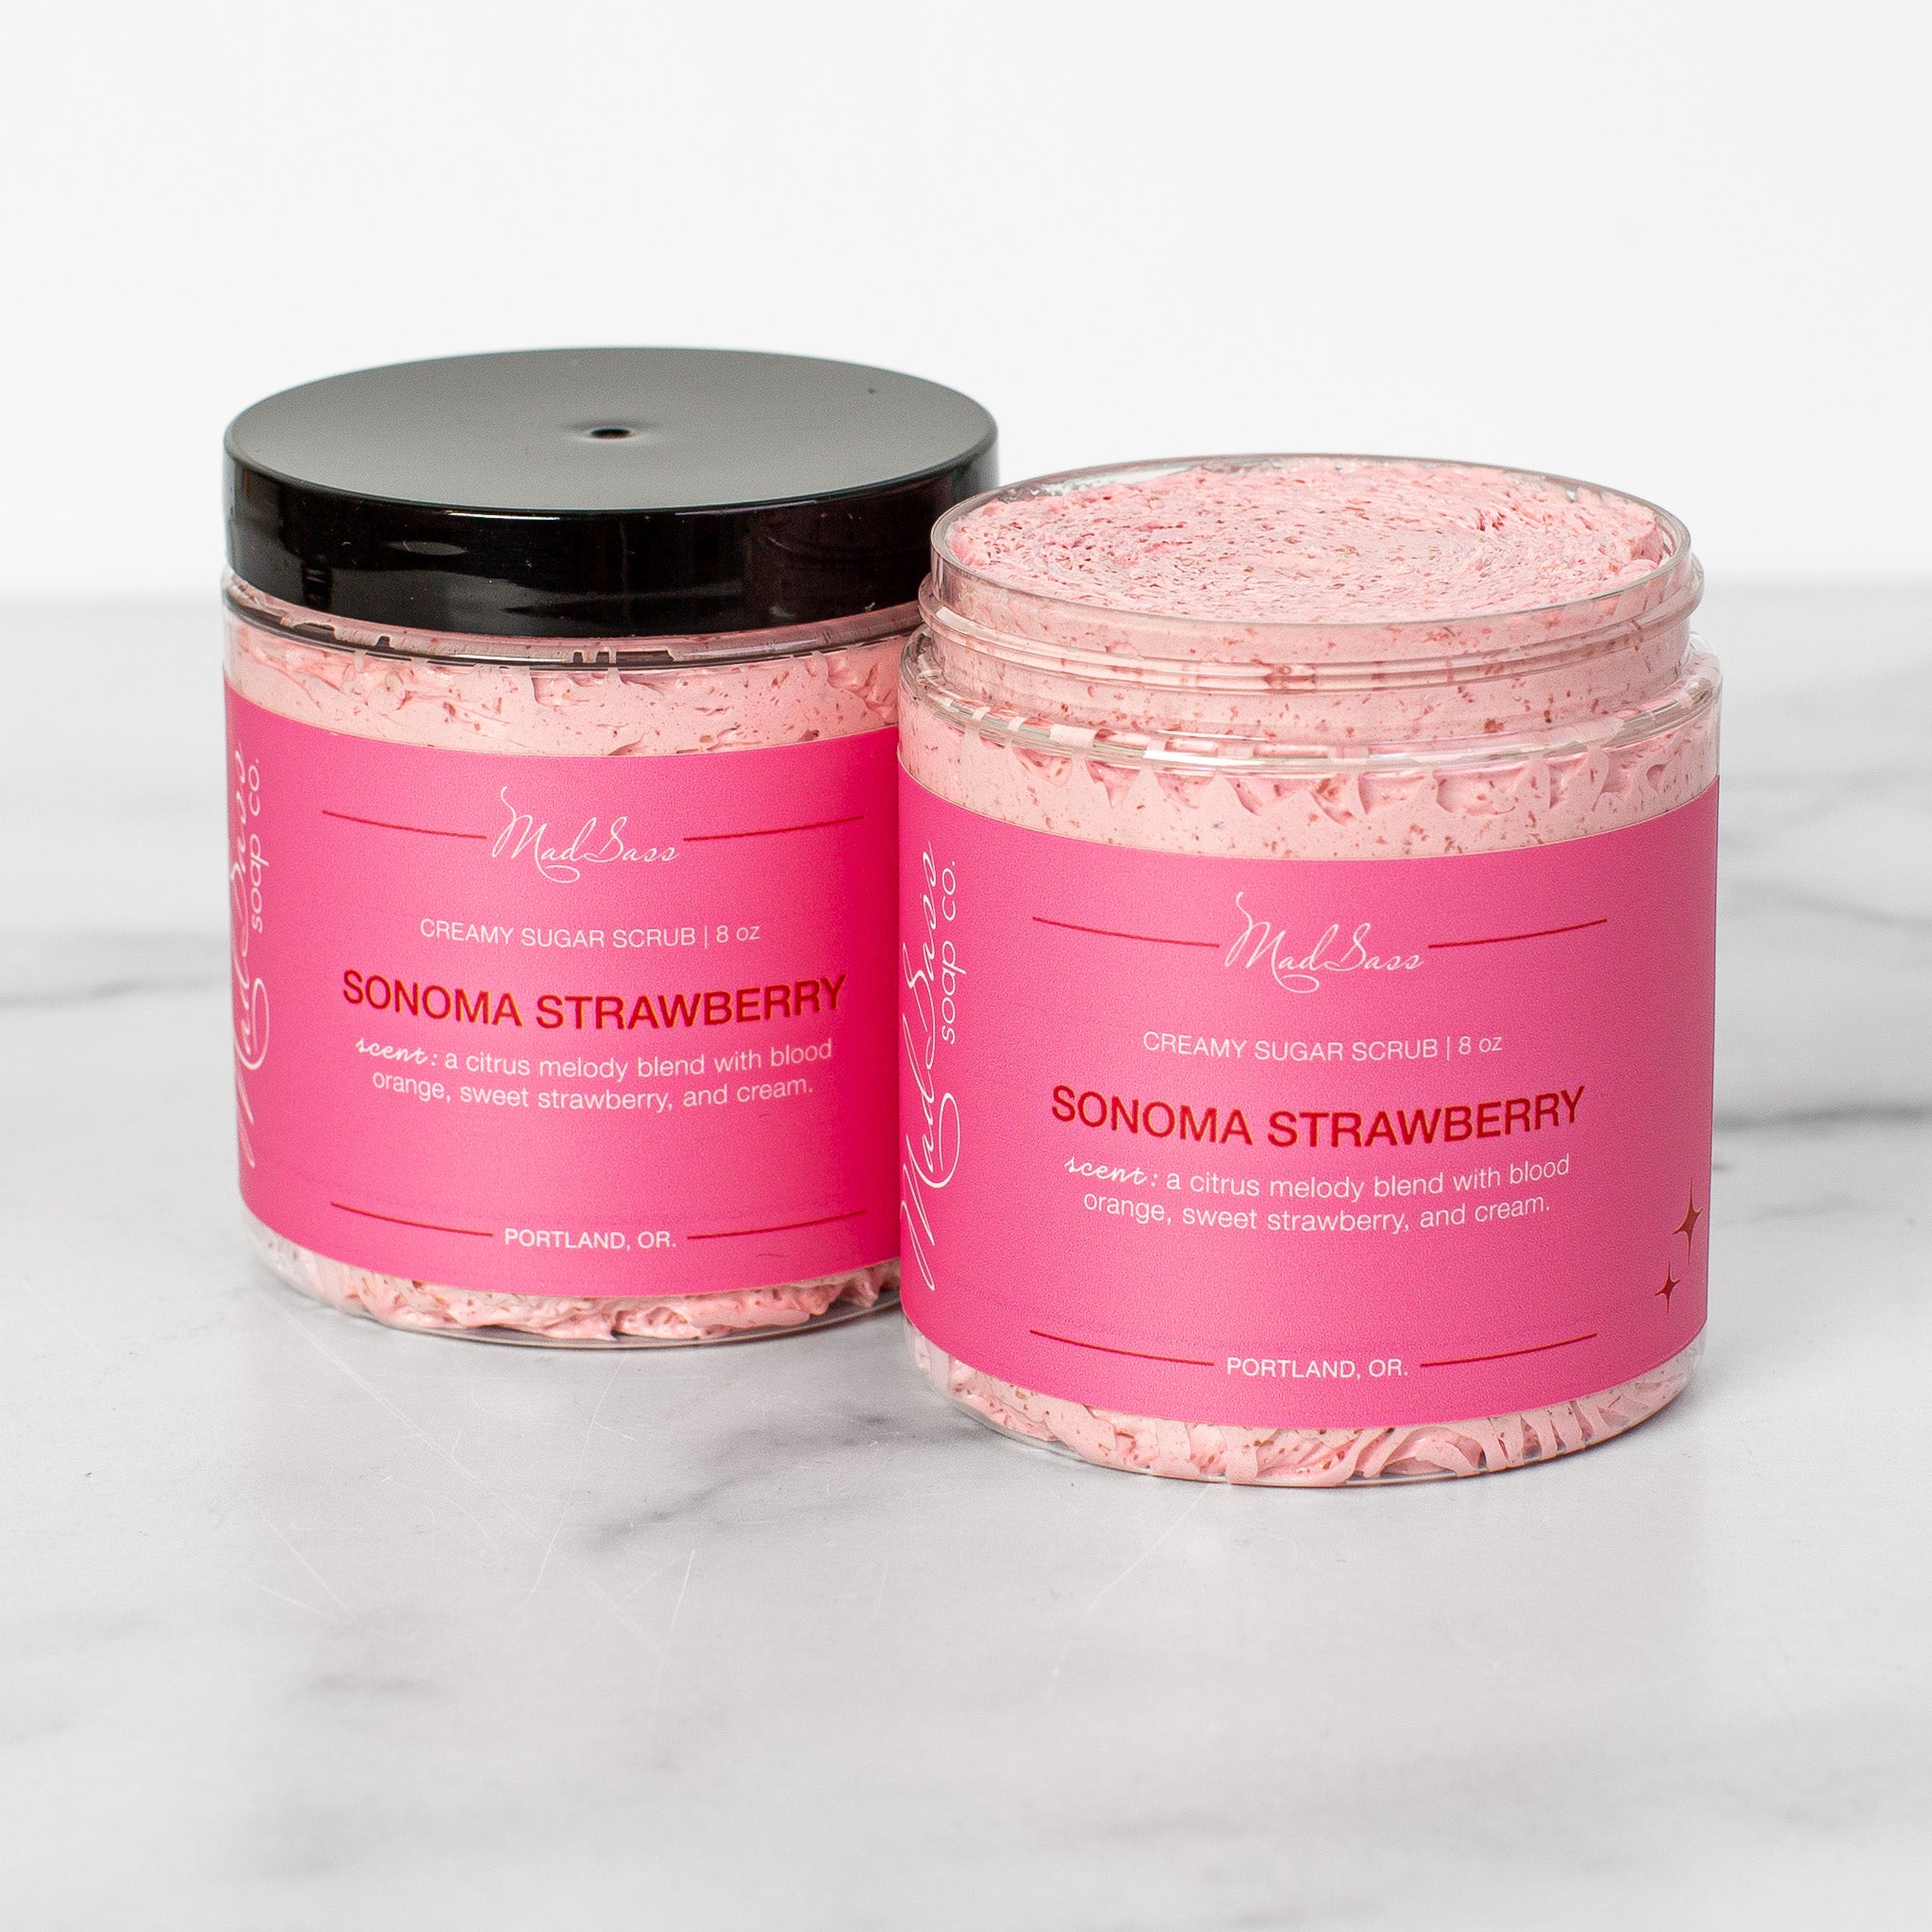 Two containers of Sonoma Strawberry Creamy Sugar Scrubs on a white background. Sonoma Strawberry is a light pink scrub in a clear tub.